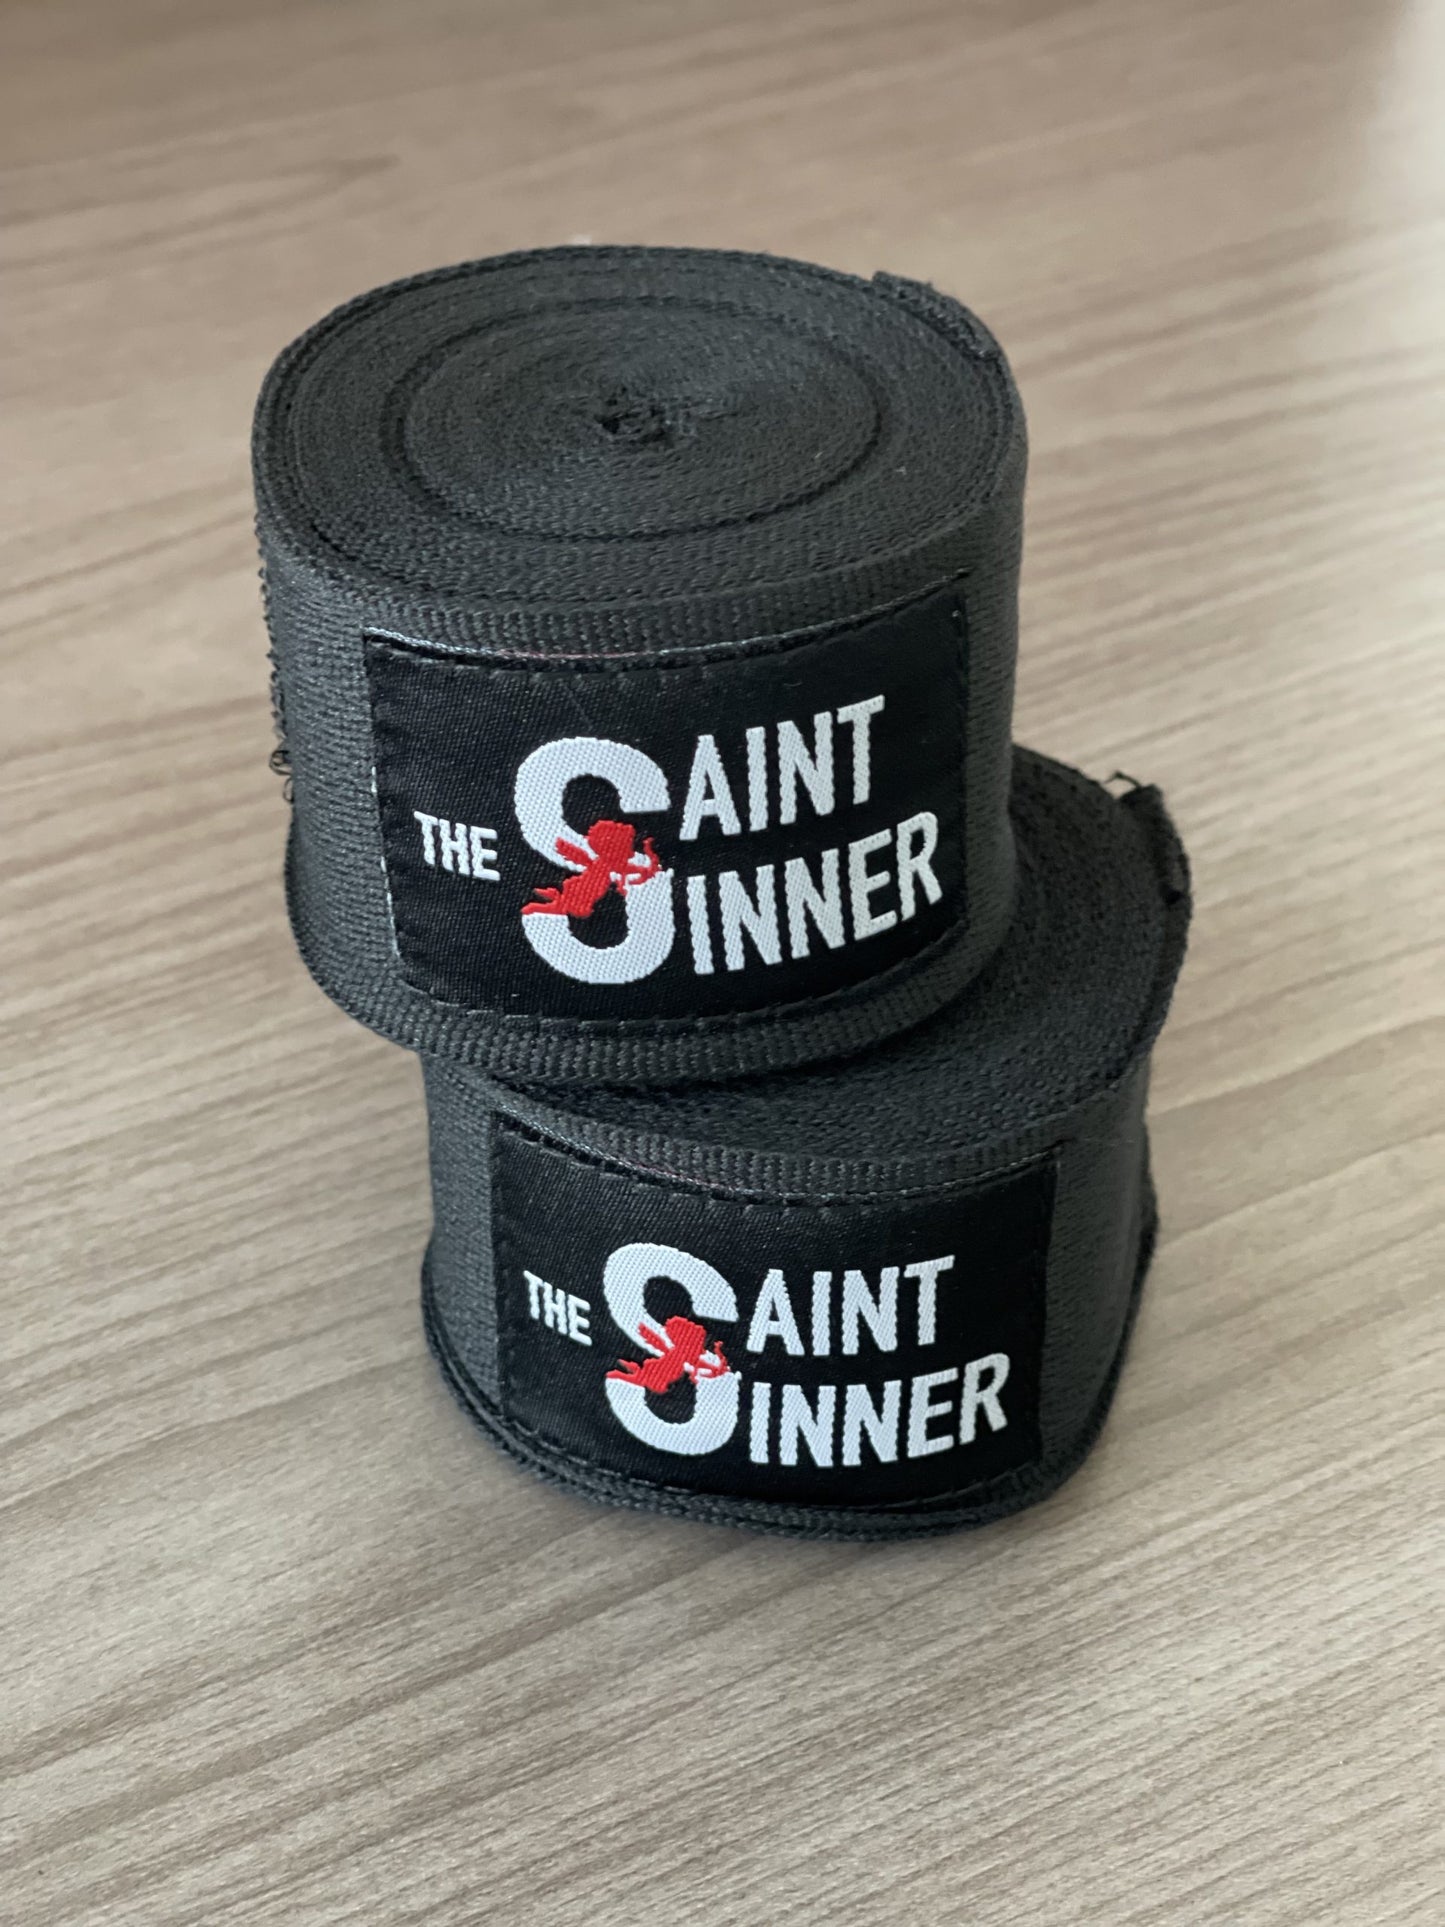 SASN Handwraps (Remit Payment to $LoyalSaint on CashApp to purchase) - Read below